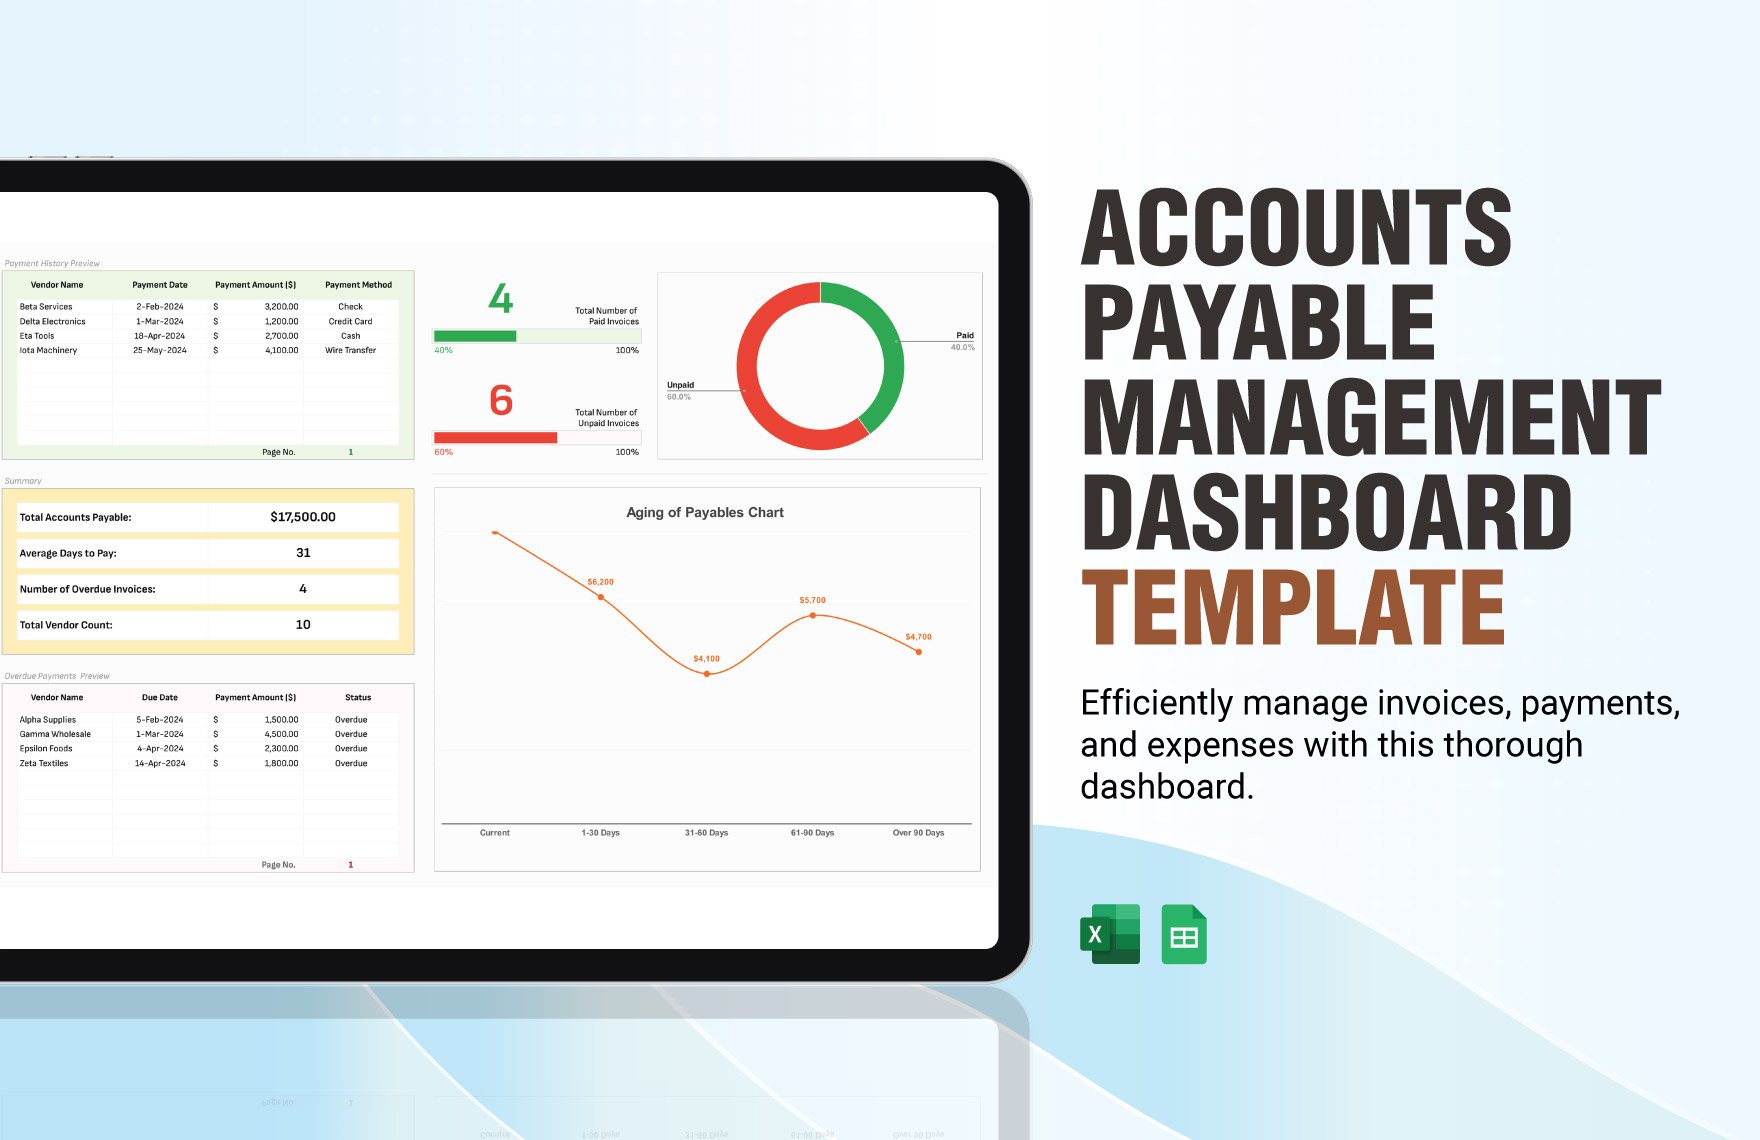 Accounts Payable Management Dashboard Template in Excel, Google Sheets